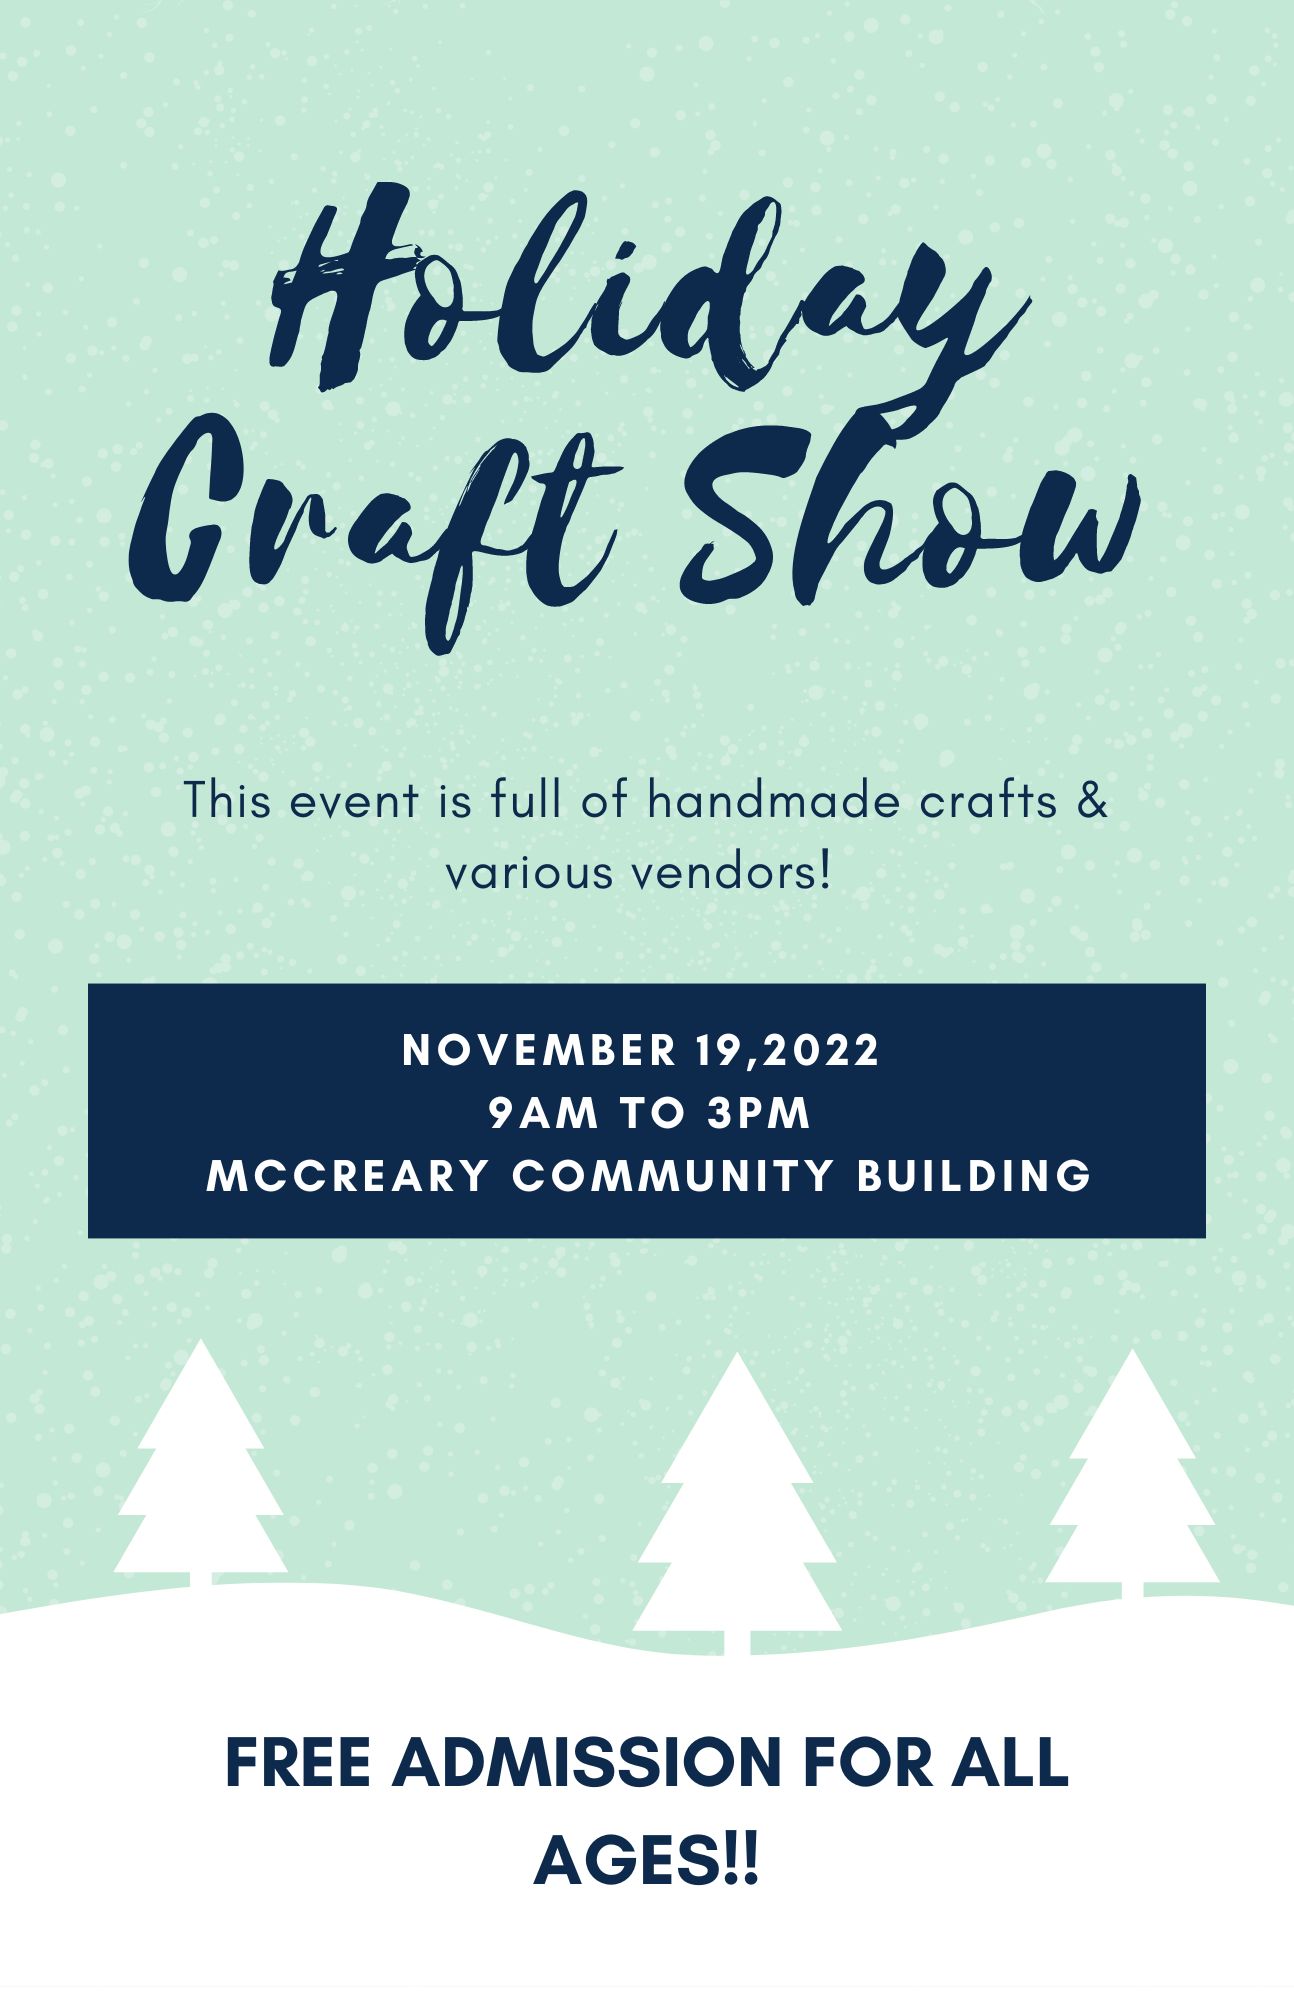 Holiday Shopping With Perry Holiday Craft Show This Weekend Raccoon